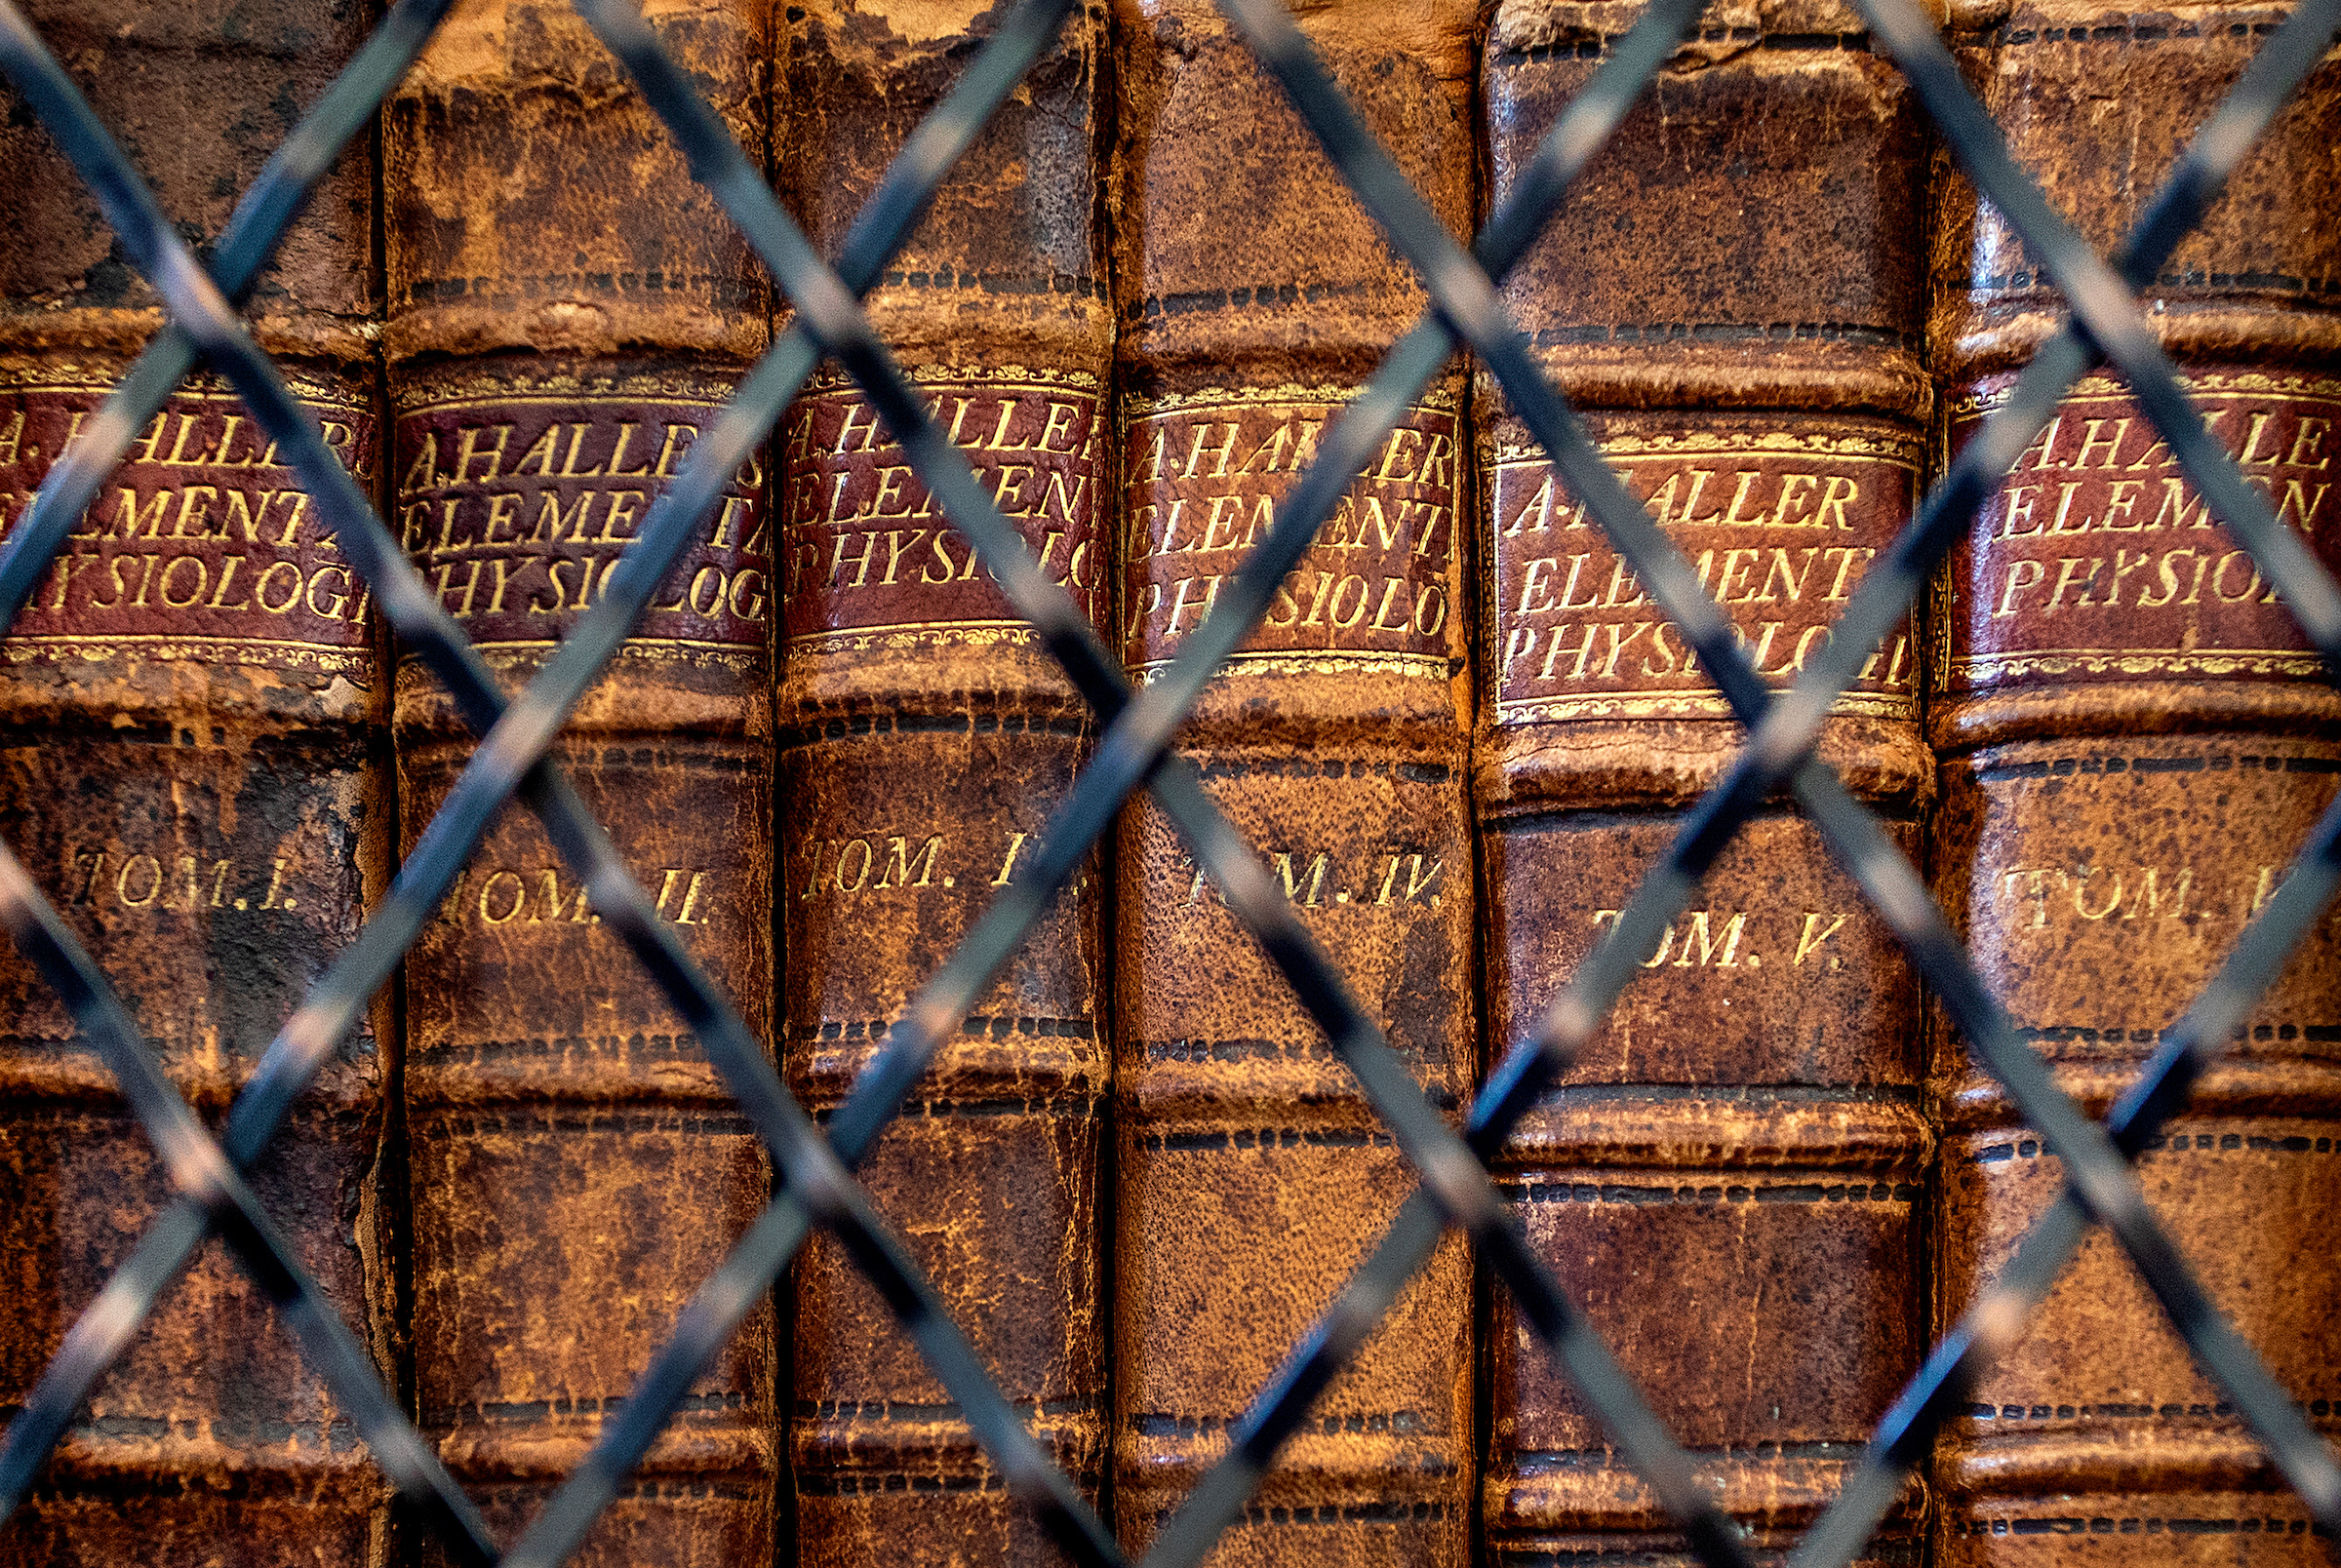 Close up of historic books spines through the iron grate cabinet door.